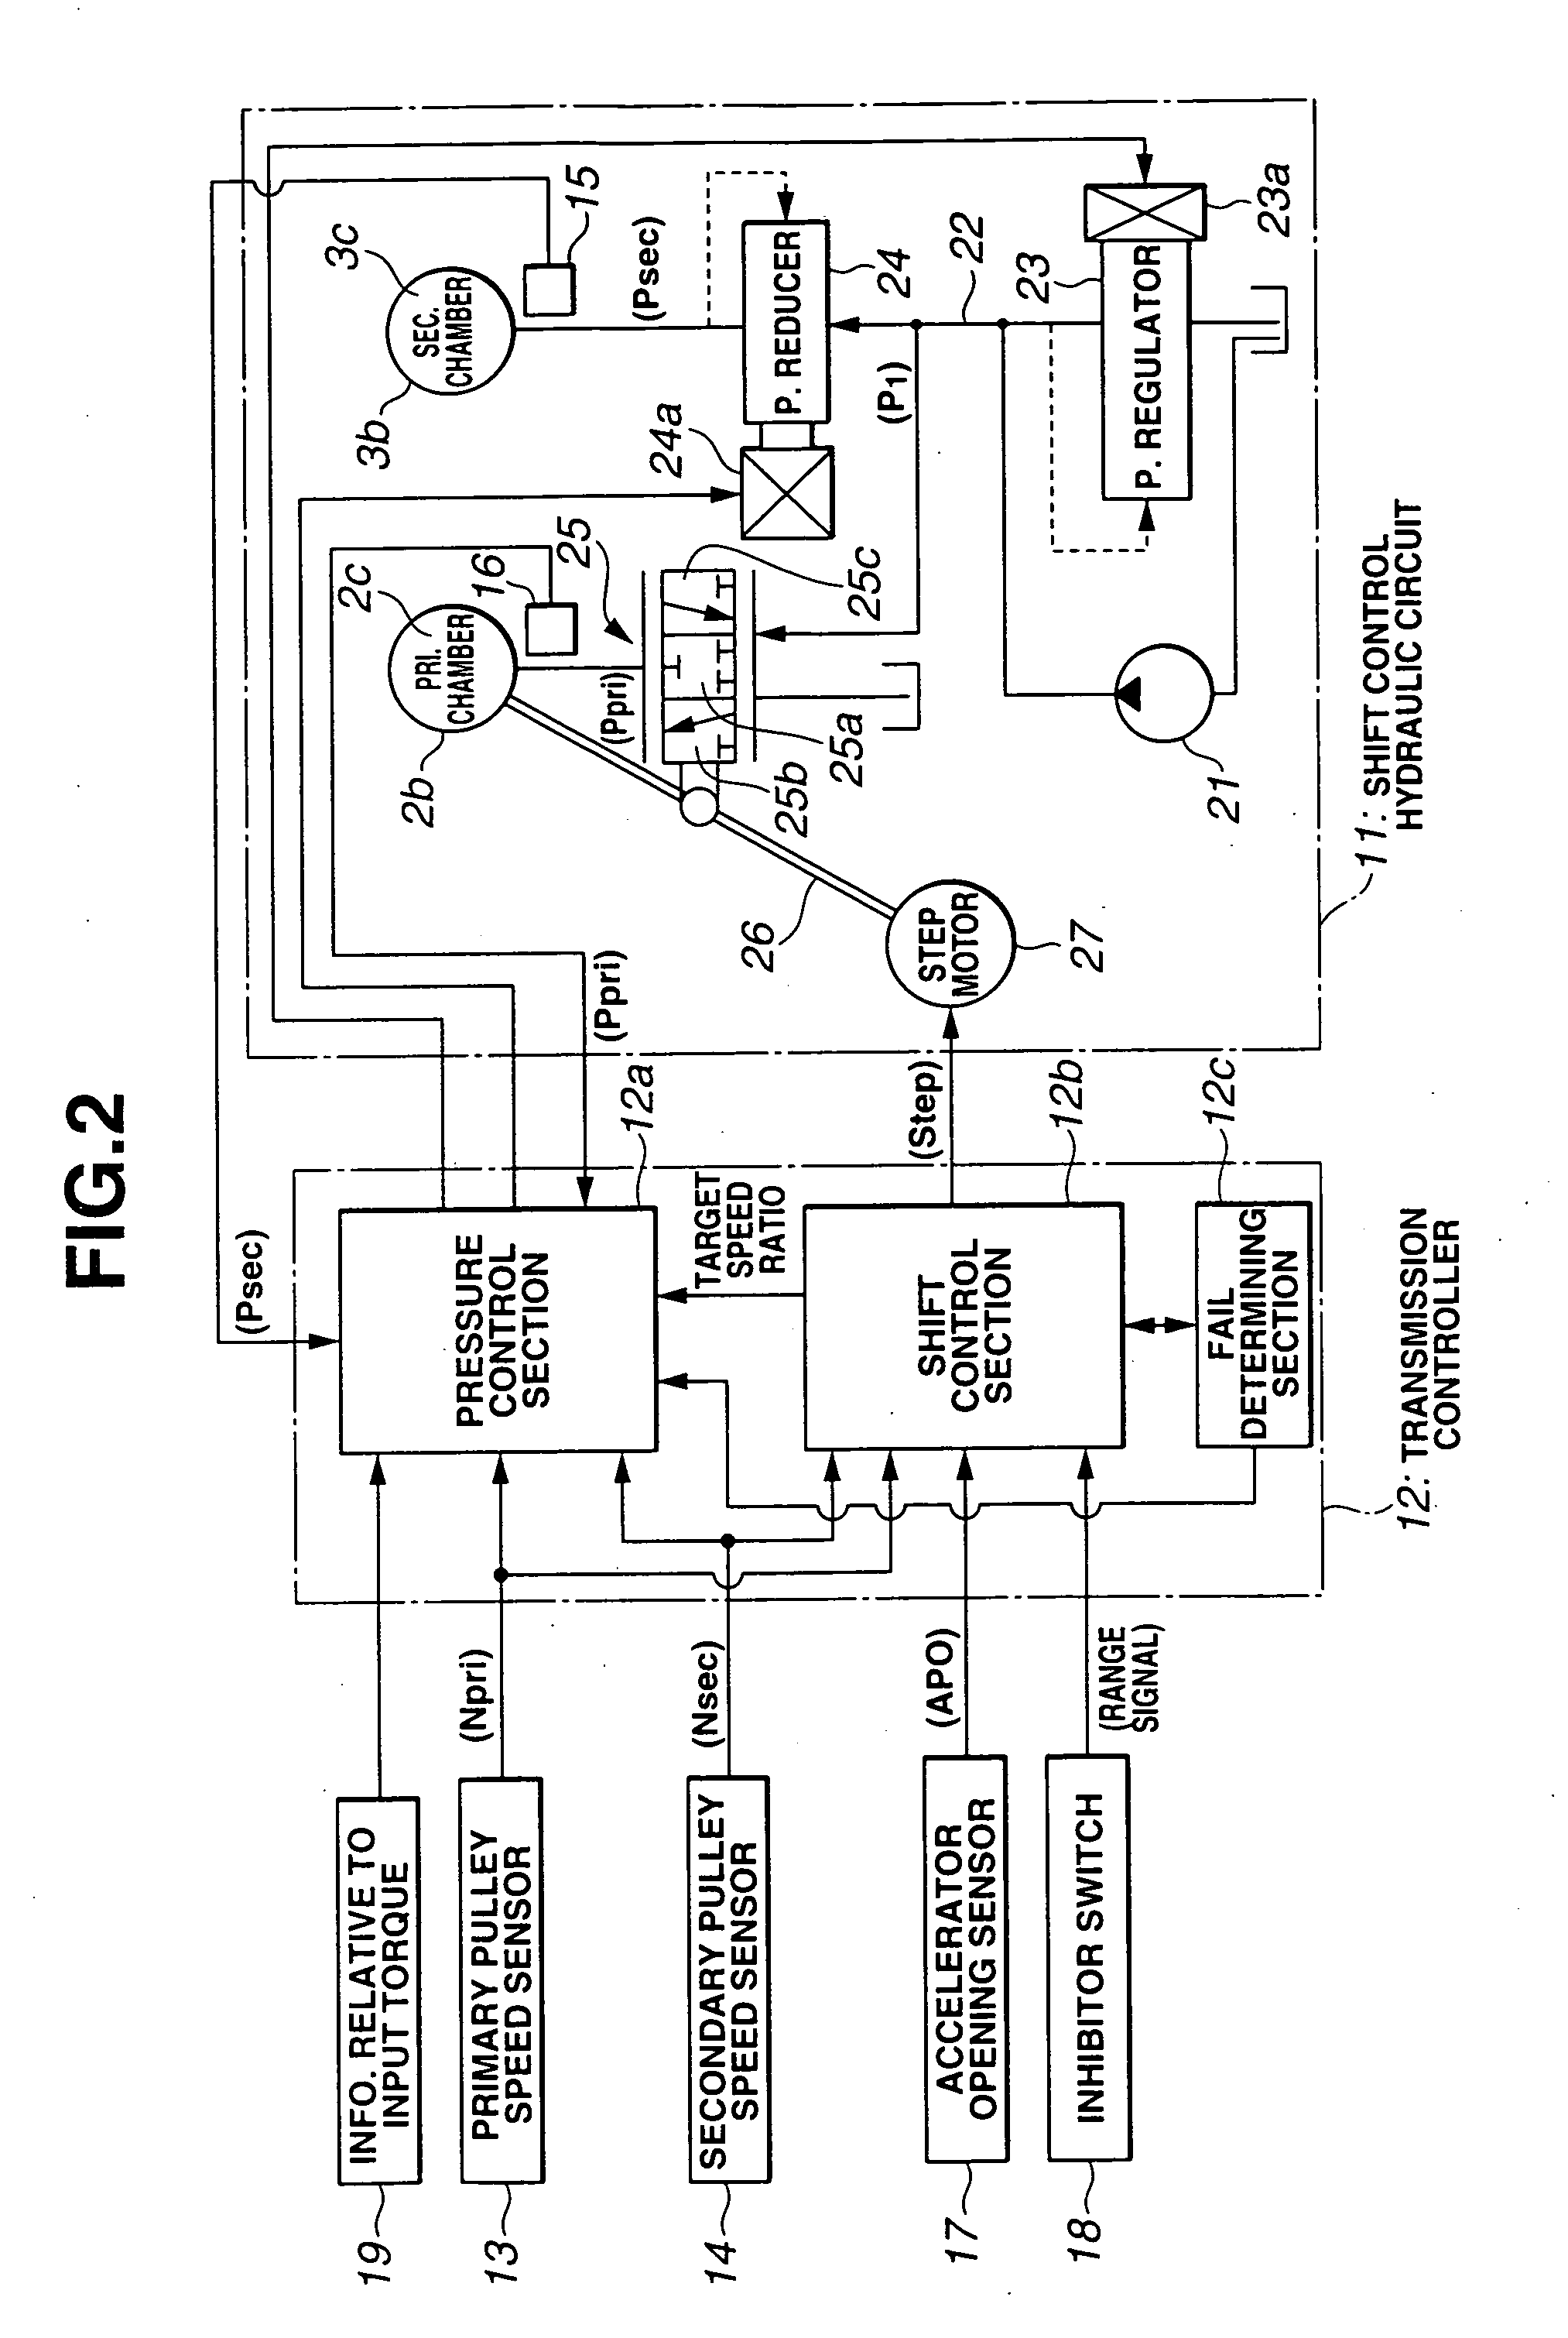 Shift control apparatus and method for continuously variable transmission